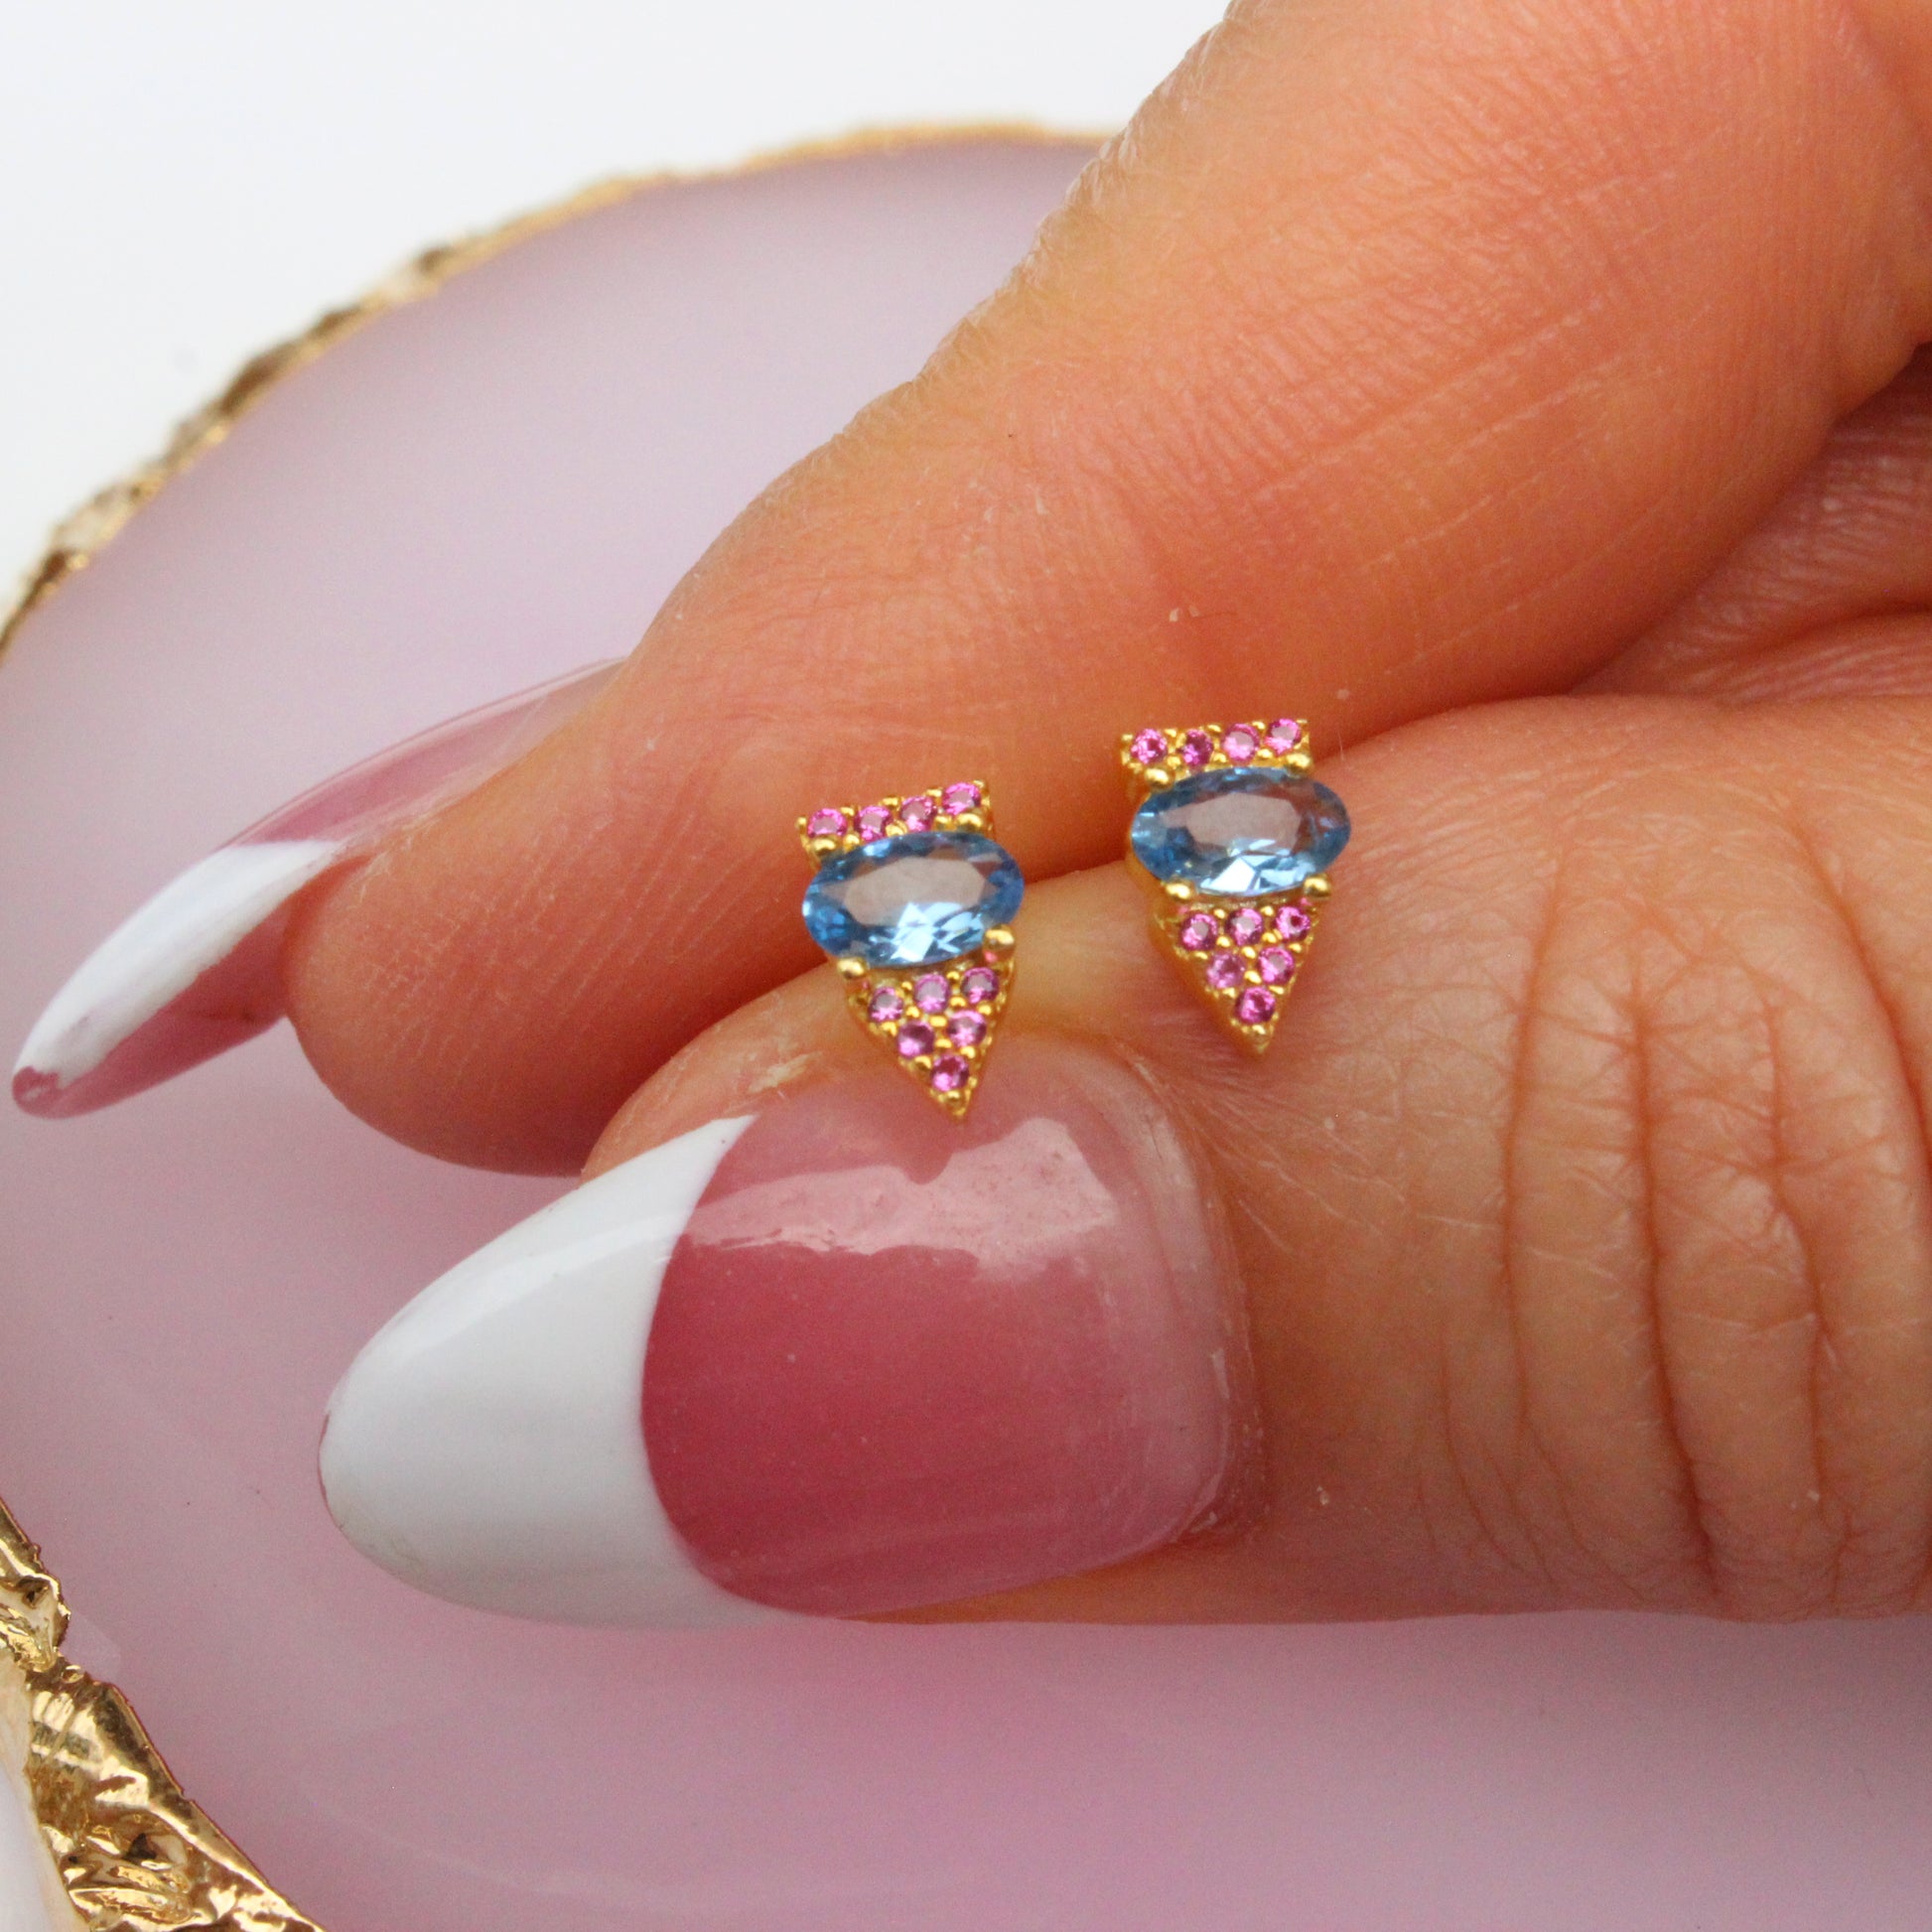 blue main stone with small pink stones, triangle stud earring